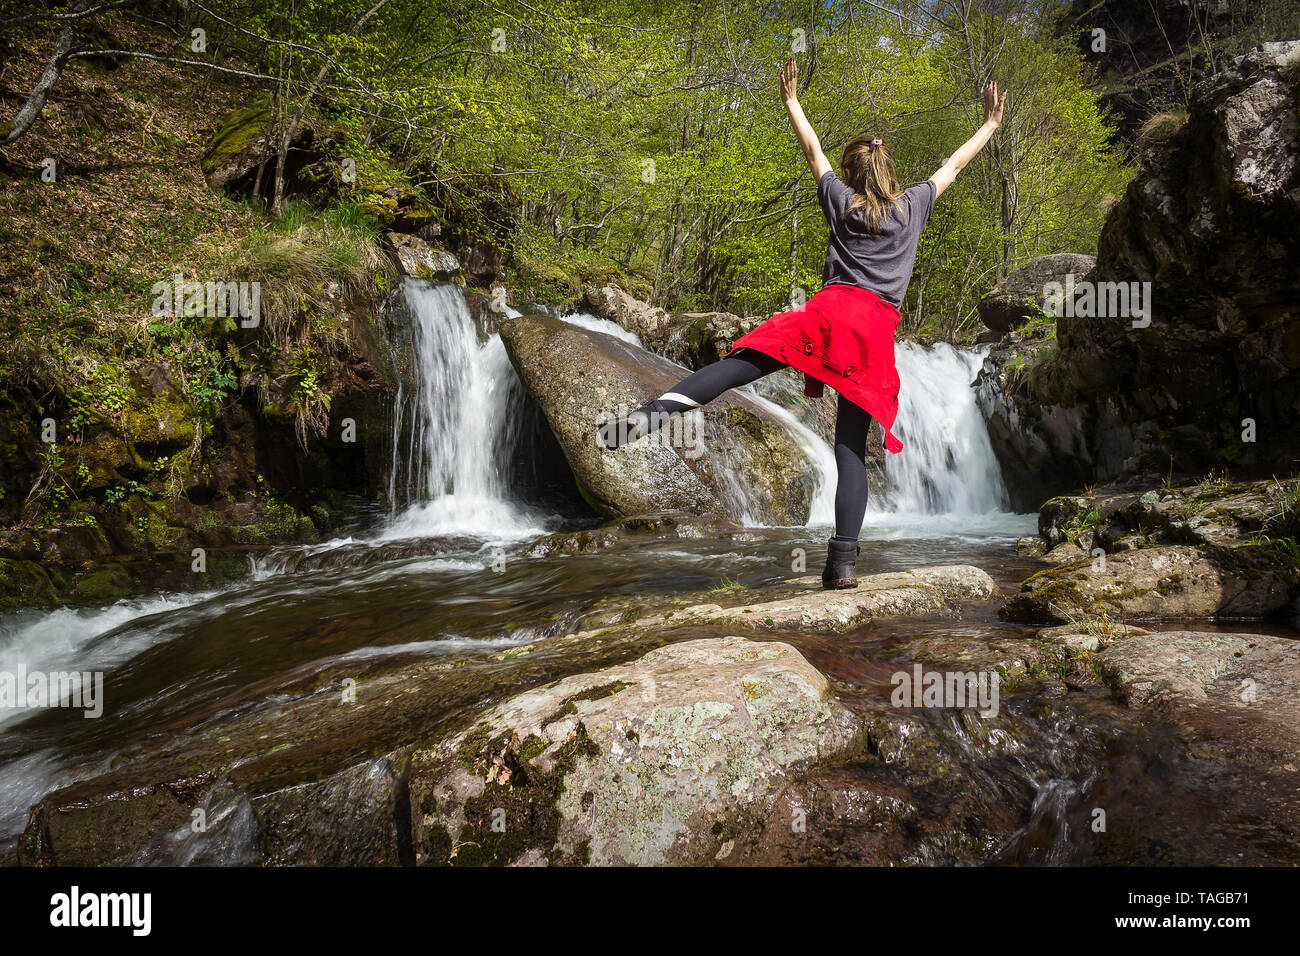 Girl with red jacket around her waist standing on one leg with hands in the air in front of scenic, waterfall on a mountain creek during early spring Stock Photo